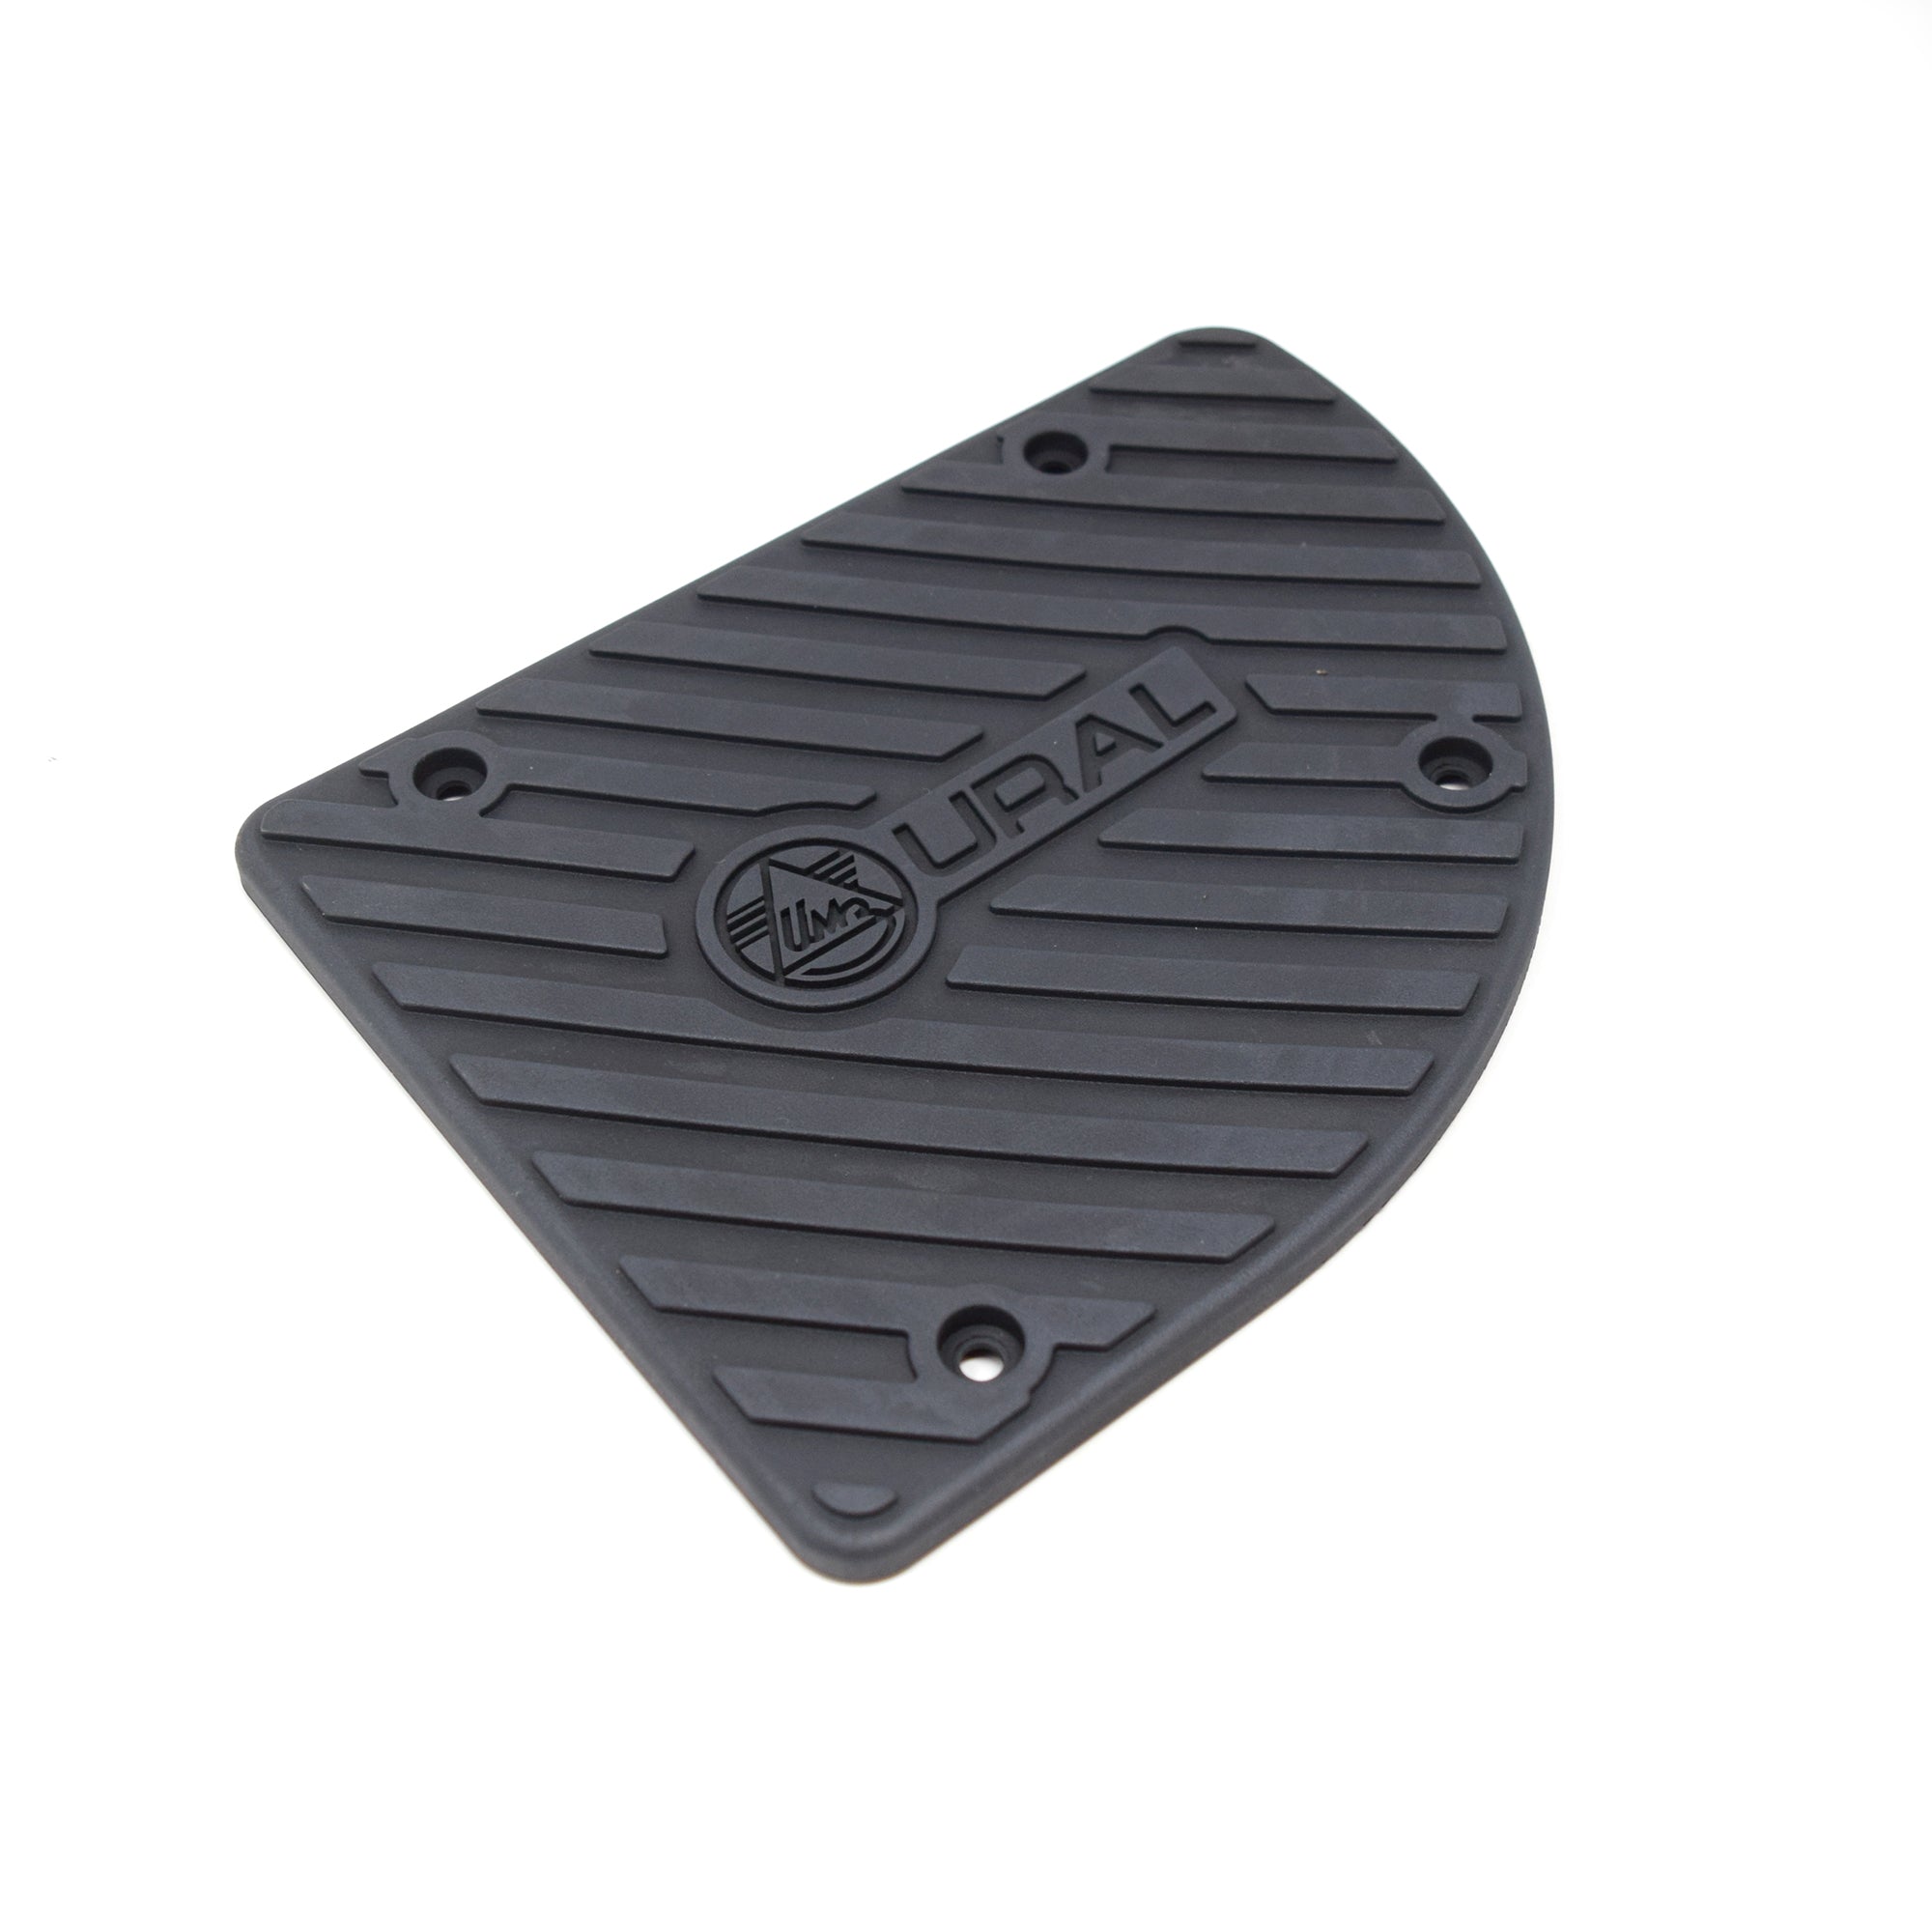 Sidecar Step Rubber Cover